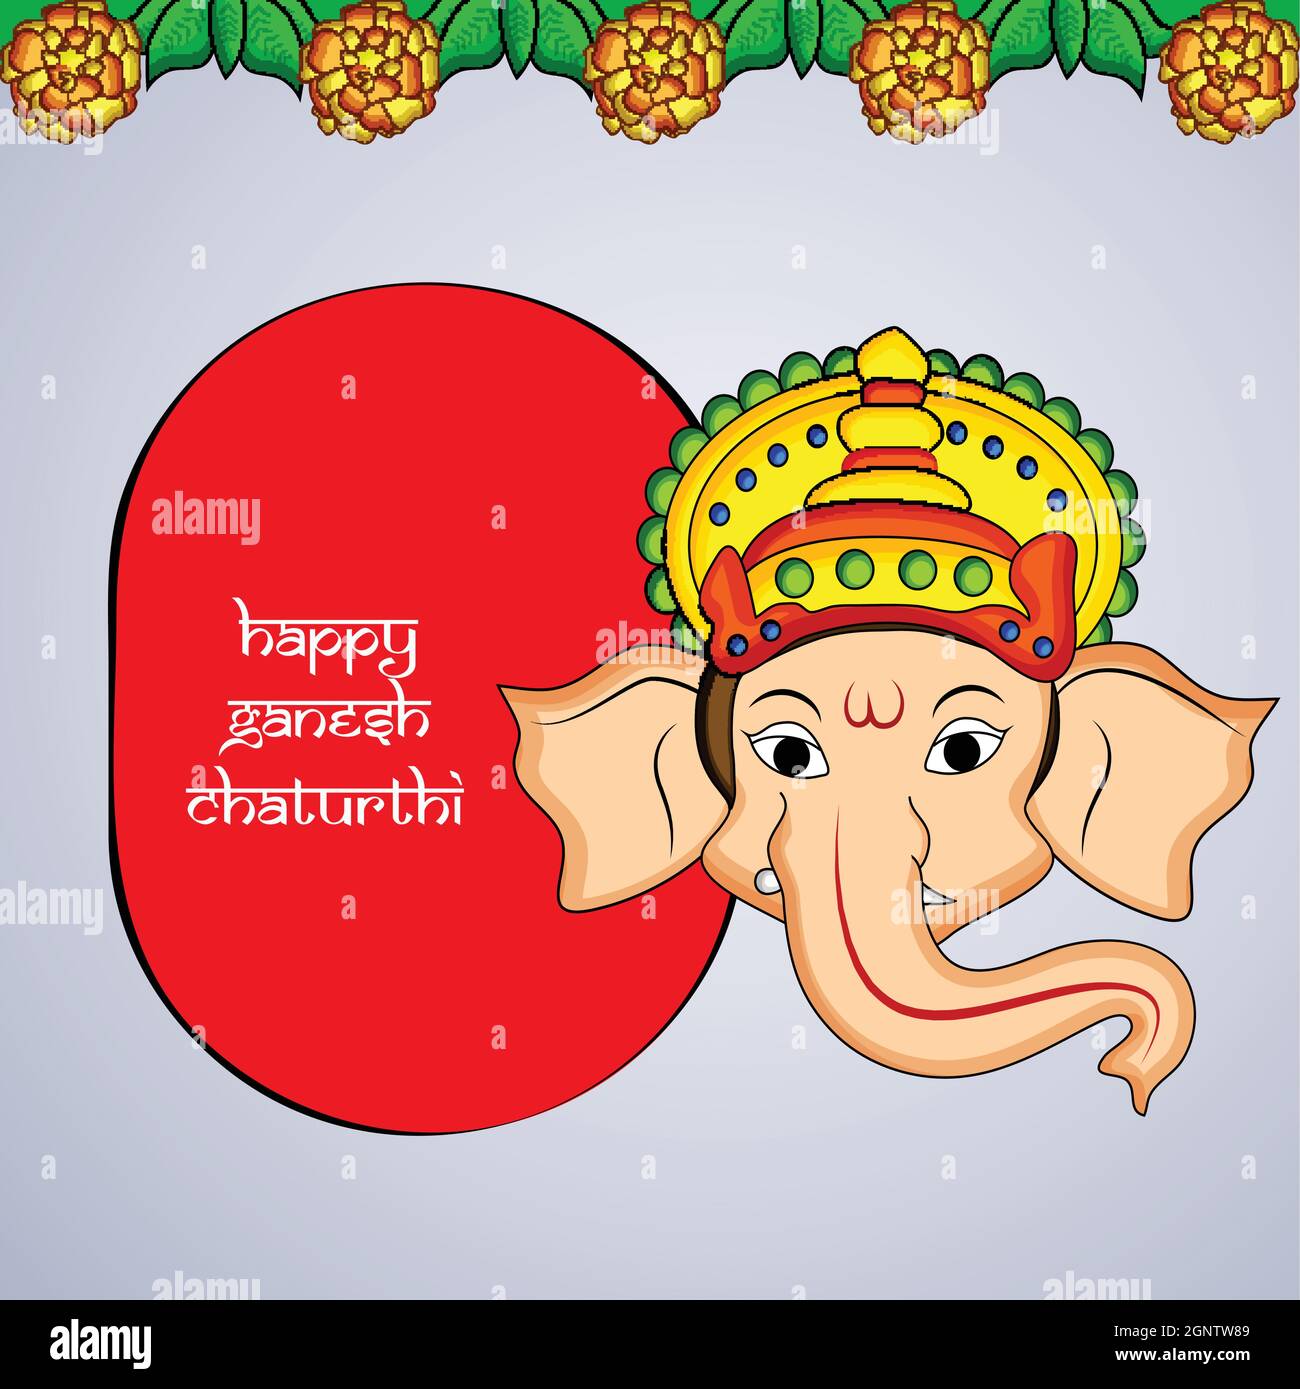 Ganapati Stock Vector Images - Alamy